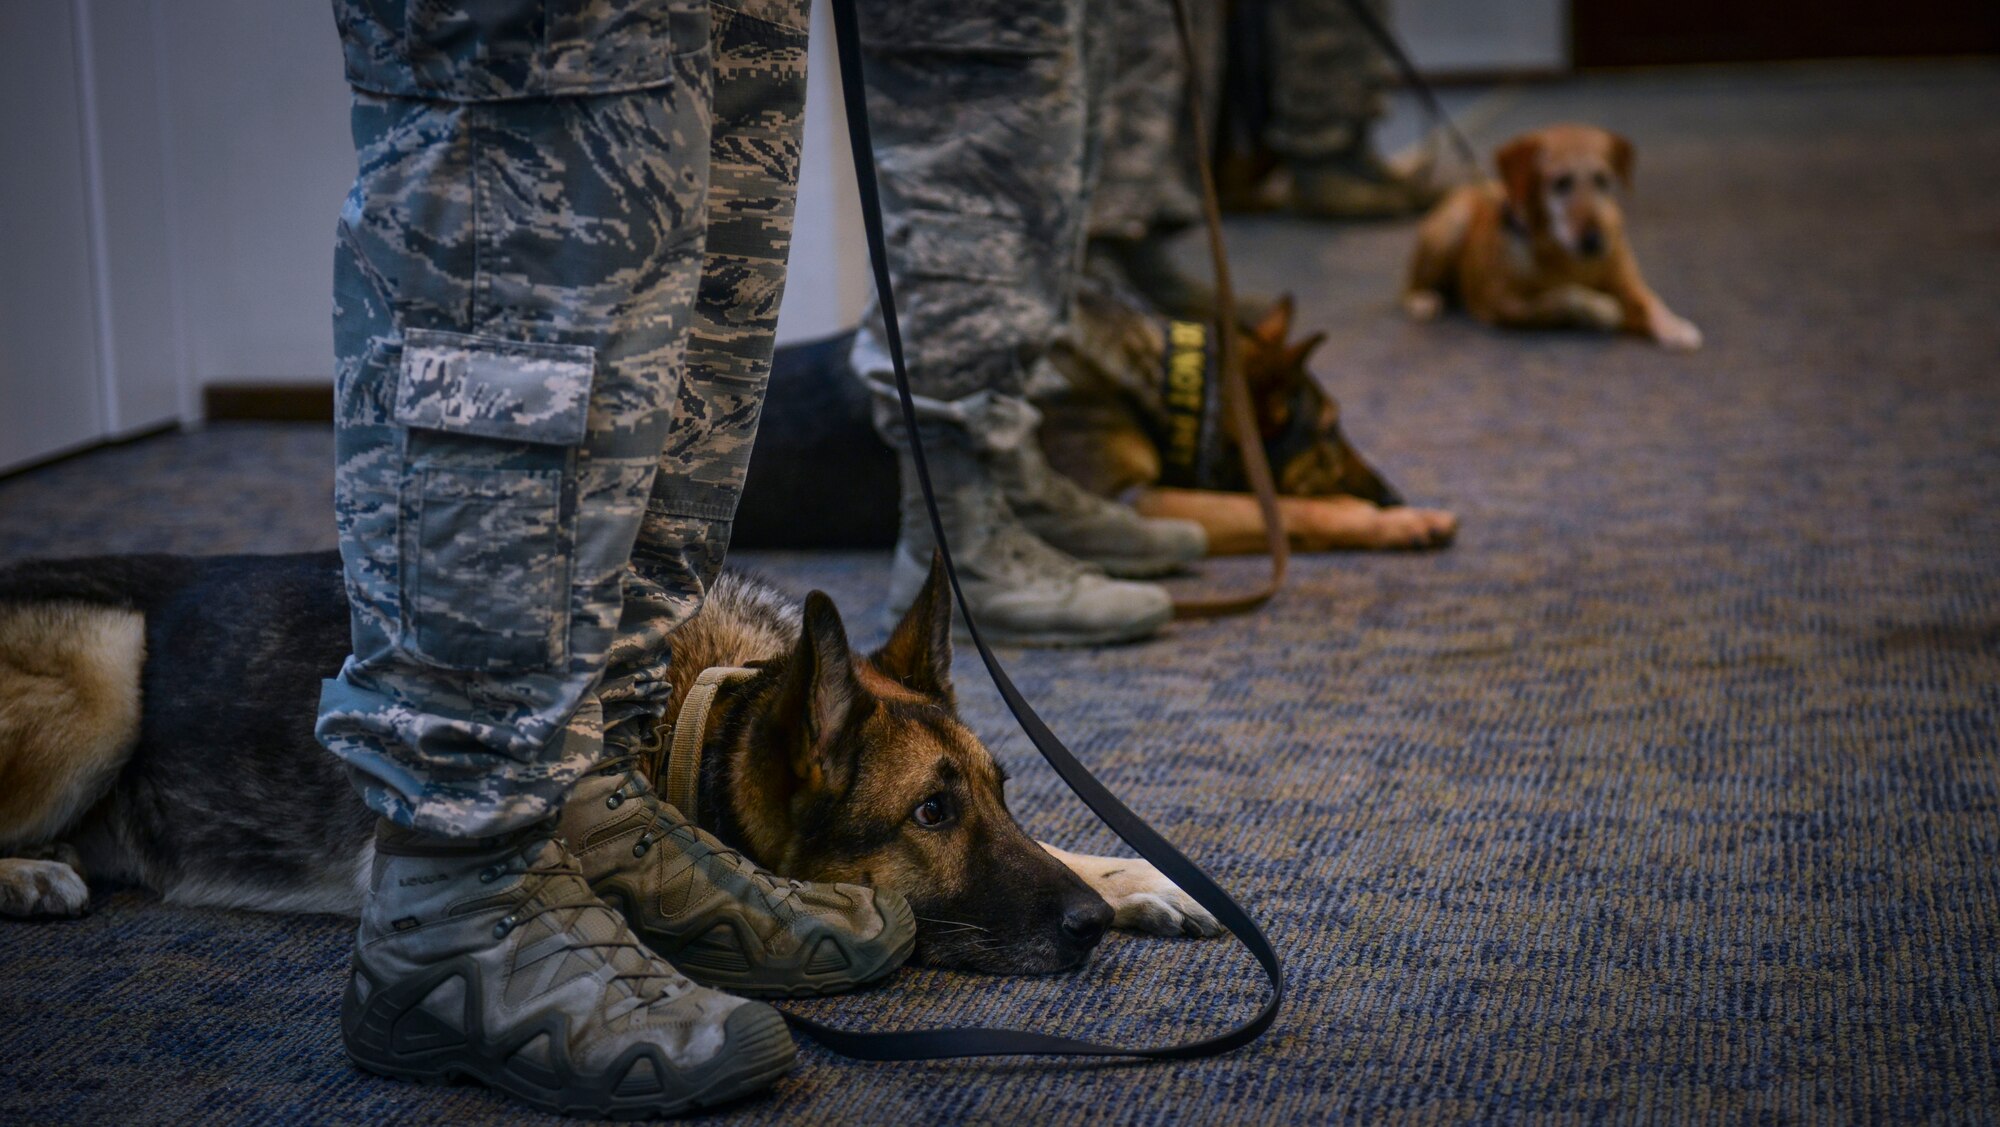 Military working dogs and their handlers from the 39th Security Forces Squadron, attend MWD Kira’s retirement ceremony Oct. 27, 2014, Incirlik Air Base, Turkey.  As a police officer on Incirlik AB, Kira worked the midnight shift keeping the base free of illegal substances.  (U.S. Air Force photo by Senior Airman Nicole Sikorski/Released)